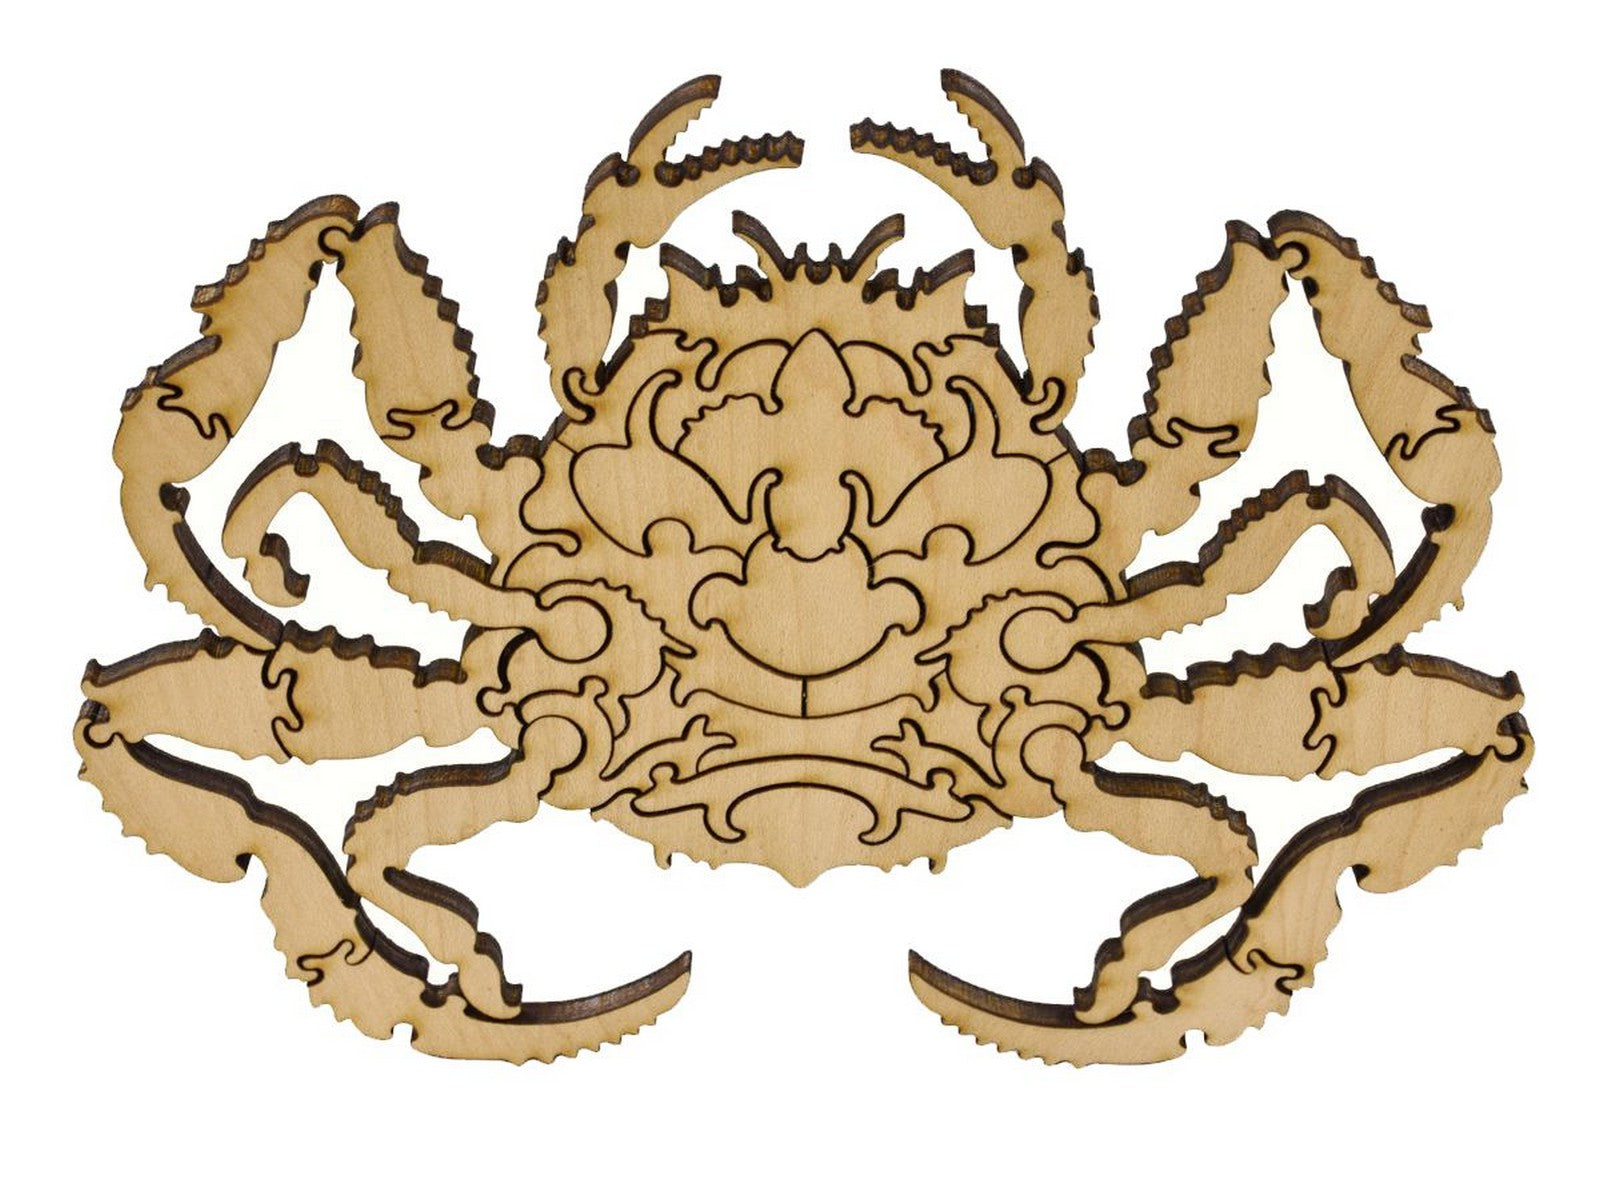 A closeup of pieces in the shape of a crab.